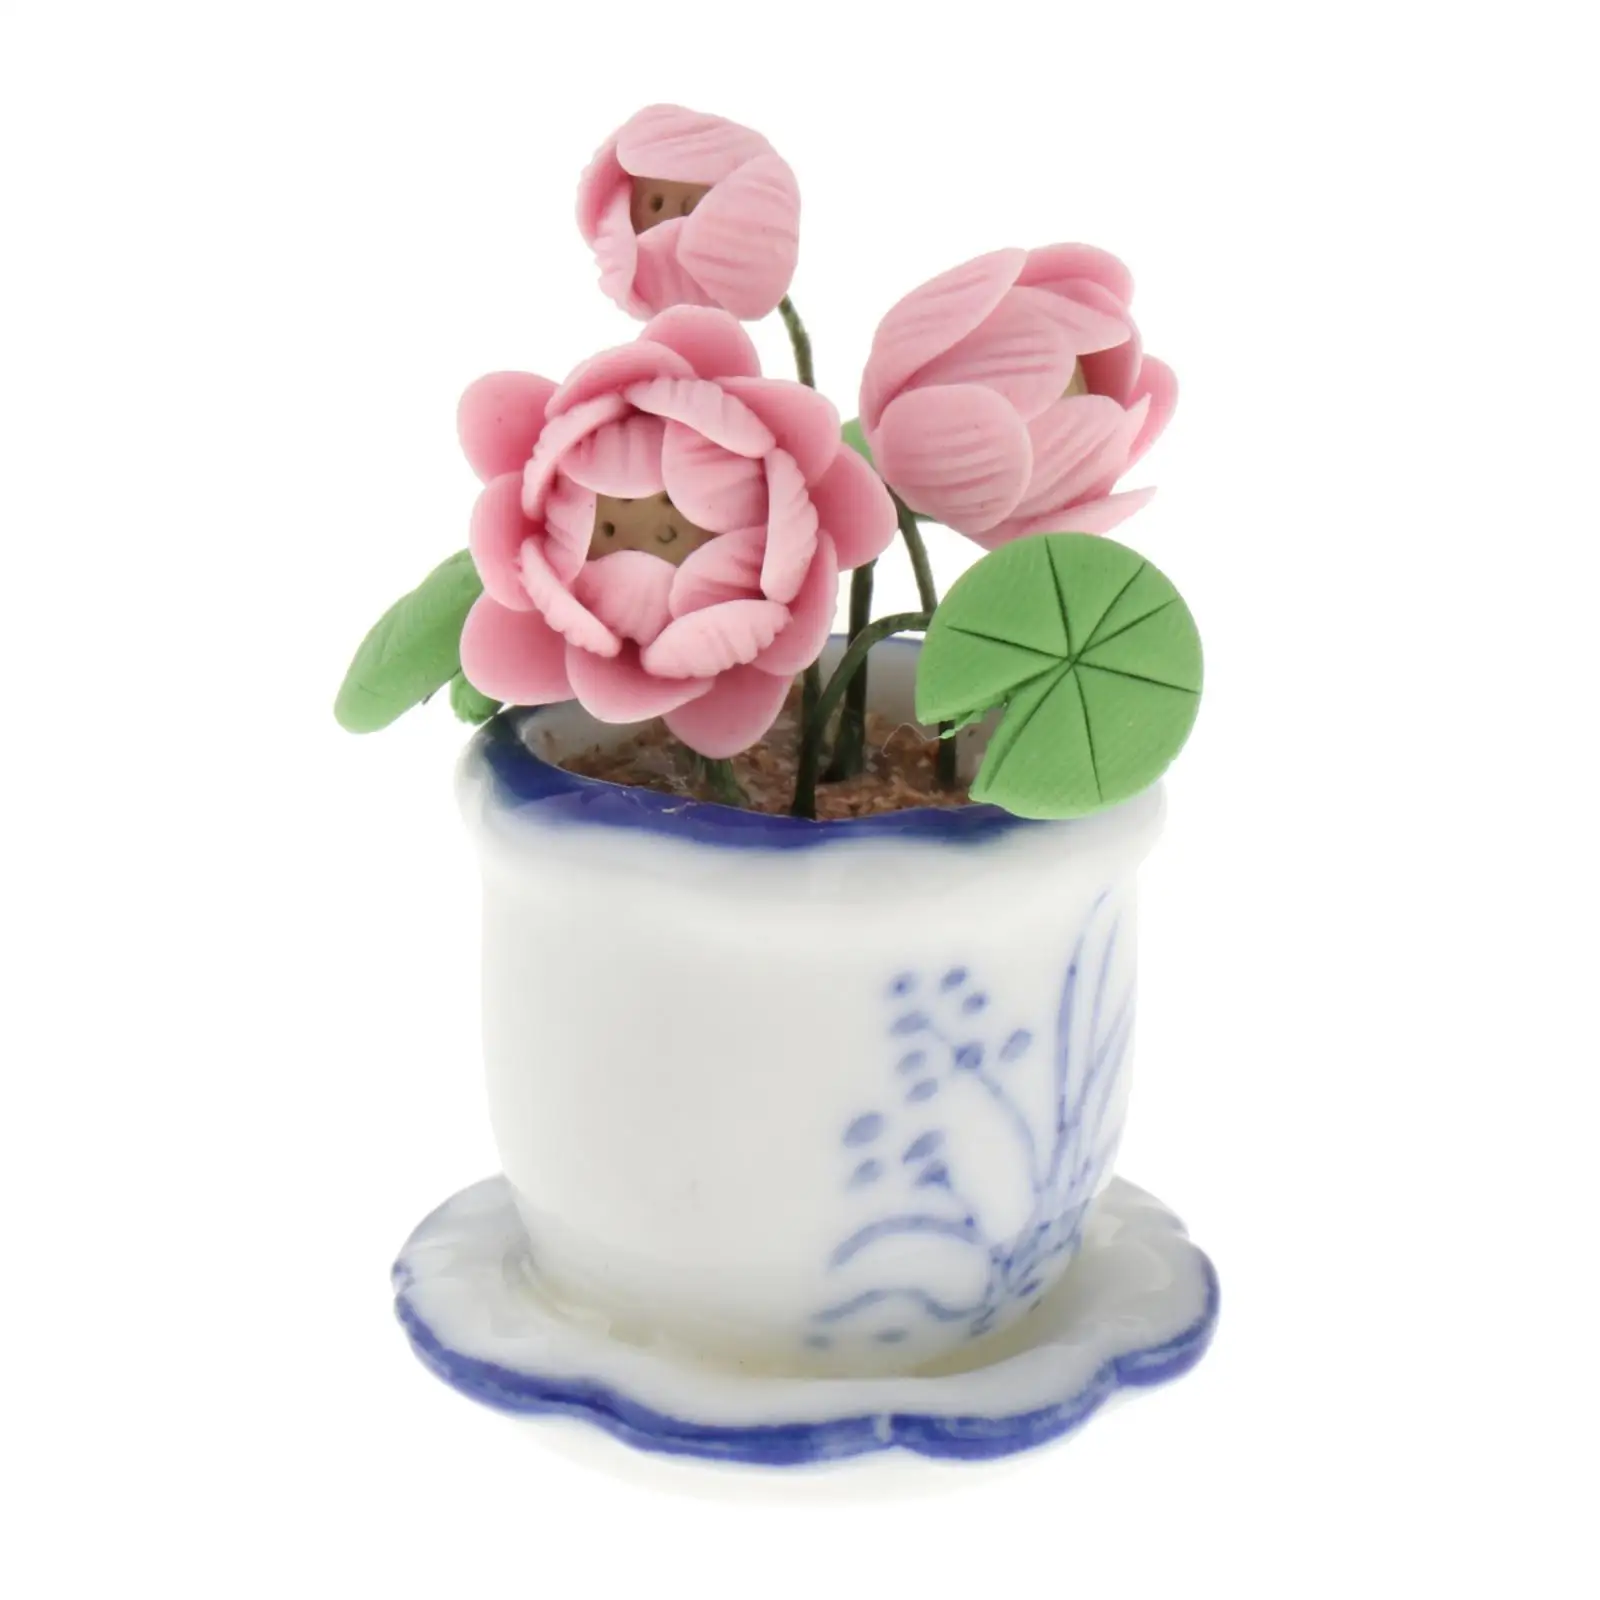 1:12 Dollhouse Lotus Plant Model Ceramic Simulated Flowerpot Model for DIY Scenery DIY Projects Model Train Decoration Building